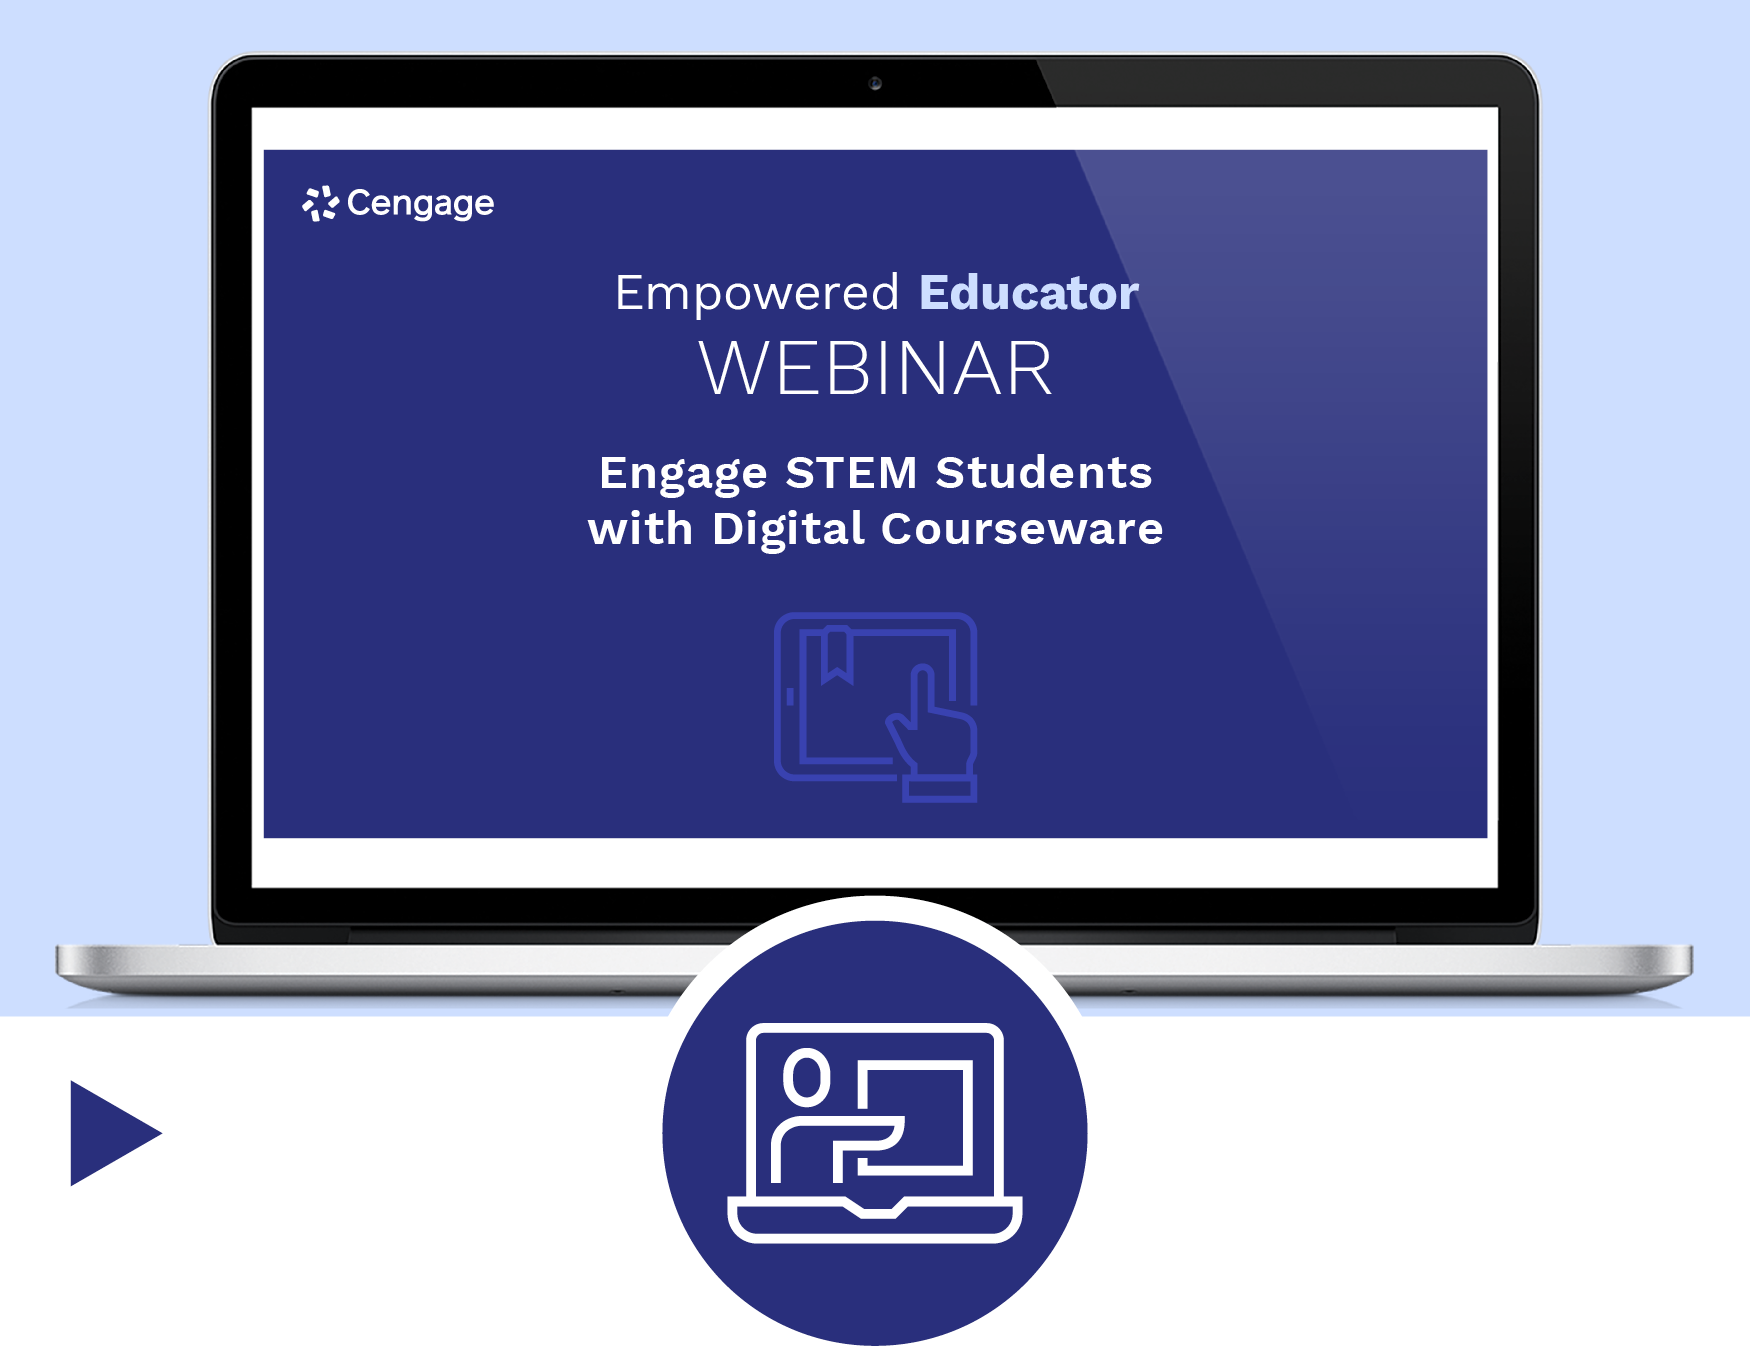 Engage STEM Students with Digital Courseware<br/><br/><br/>